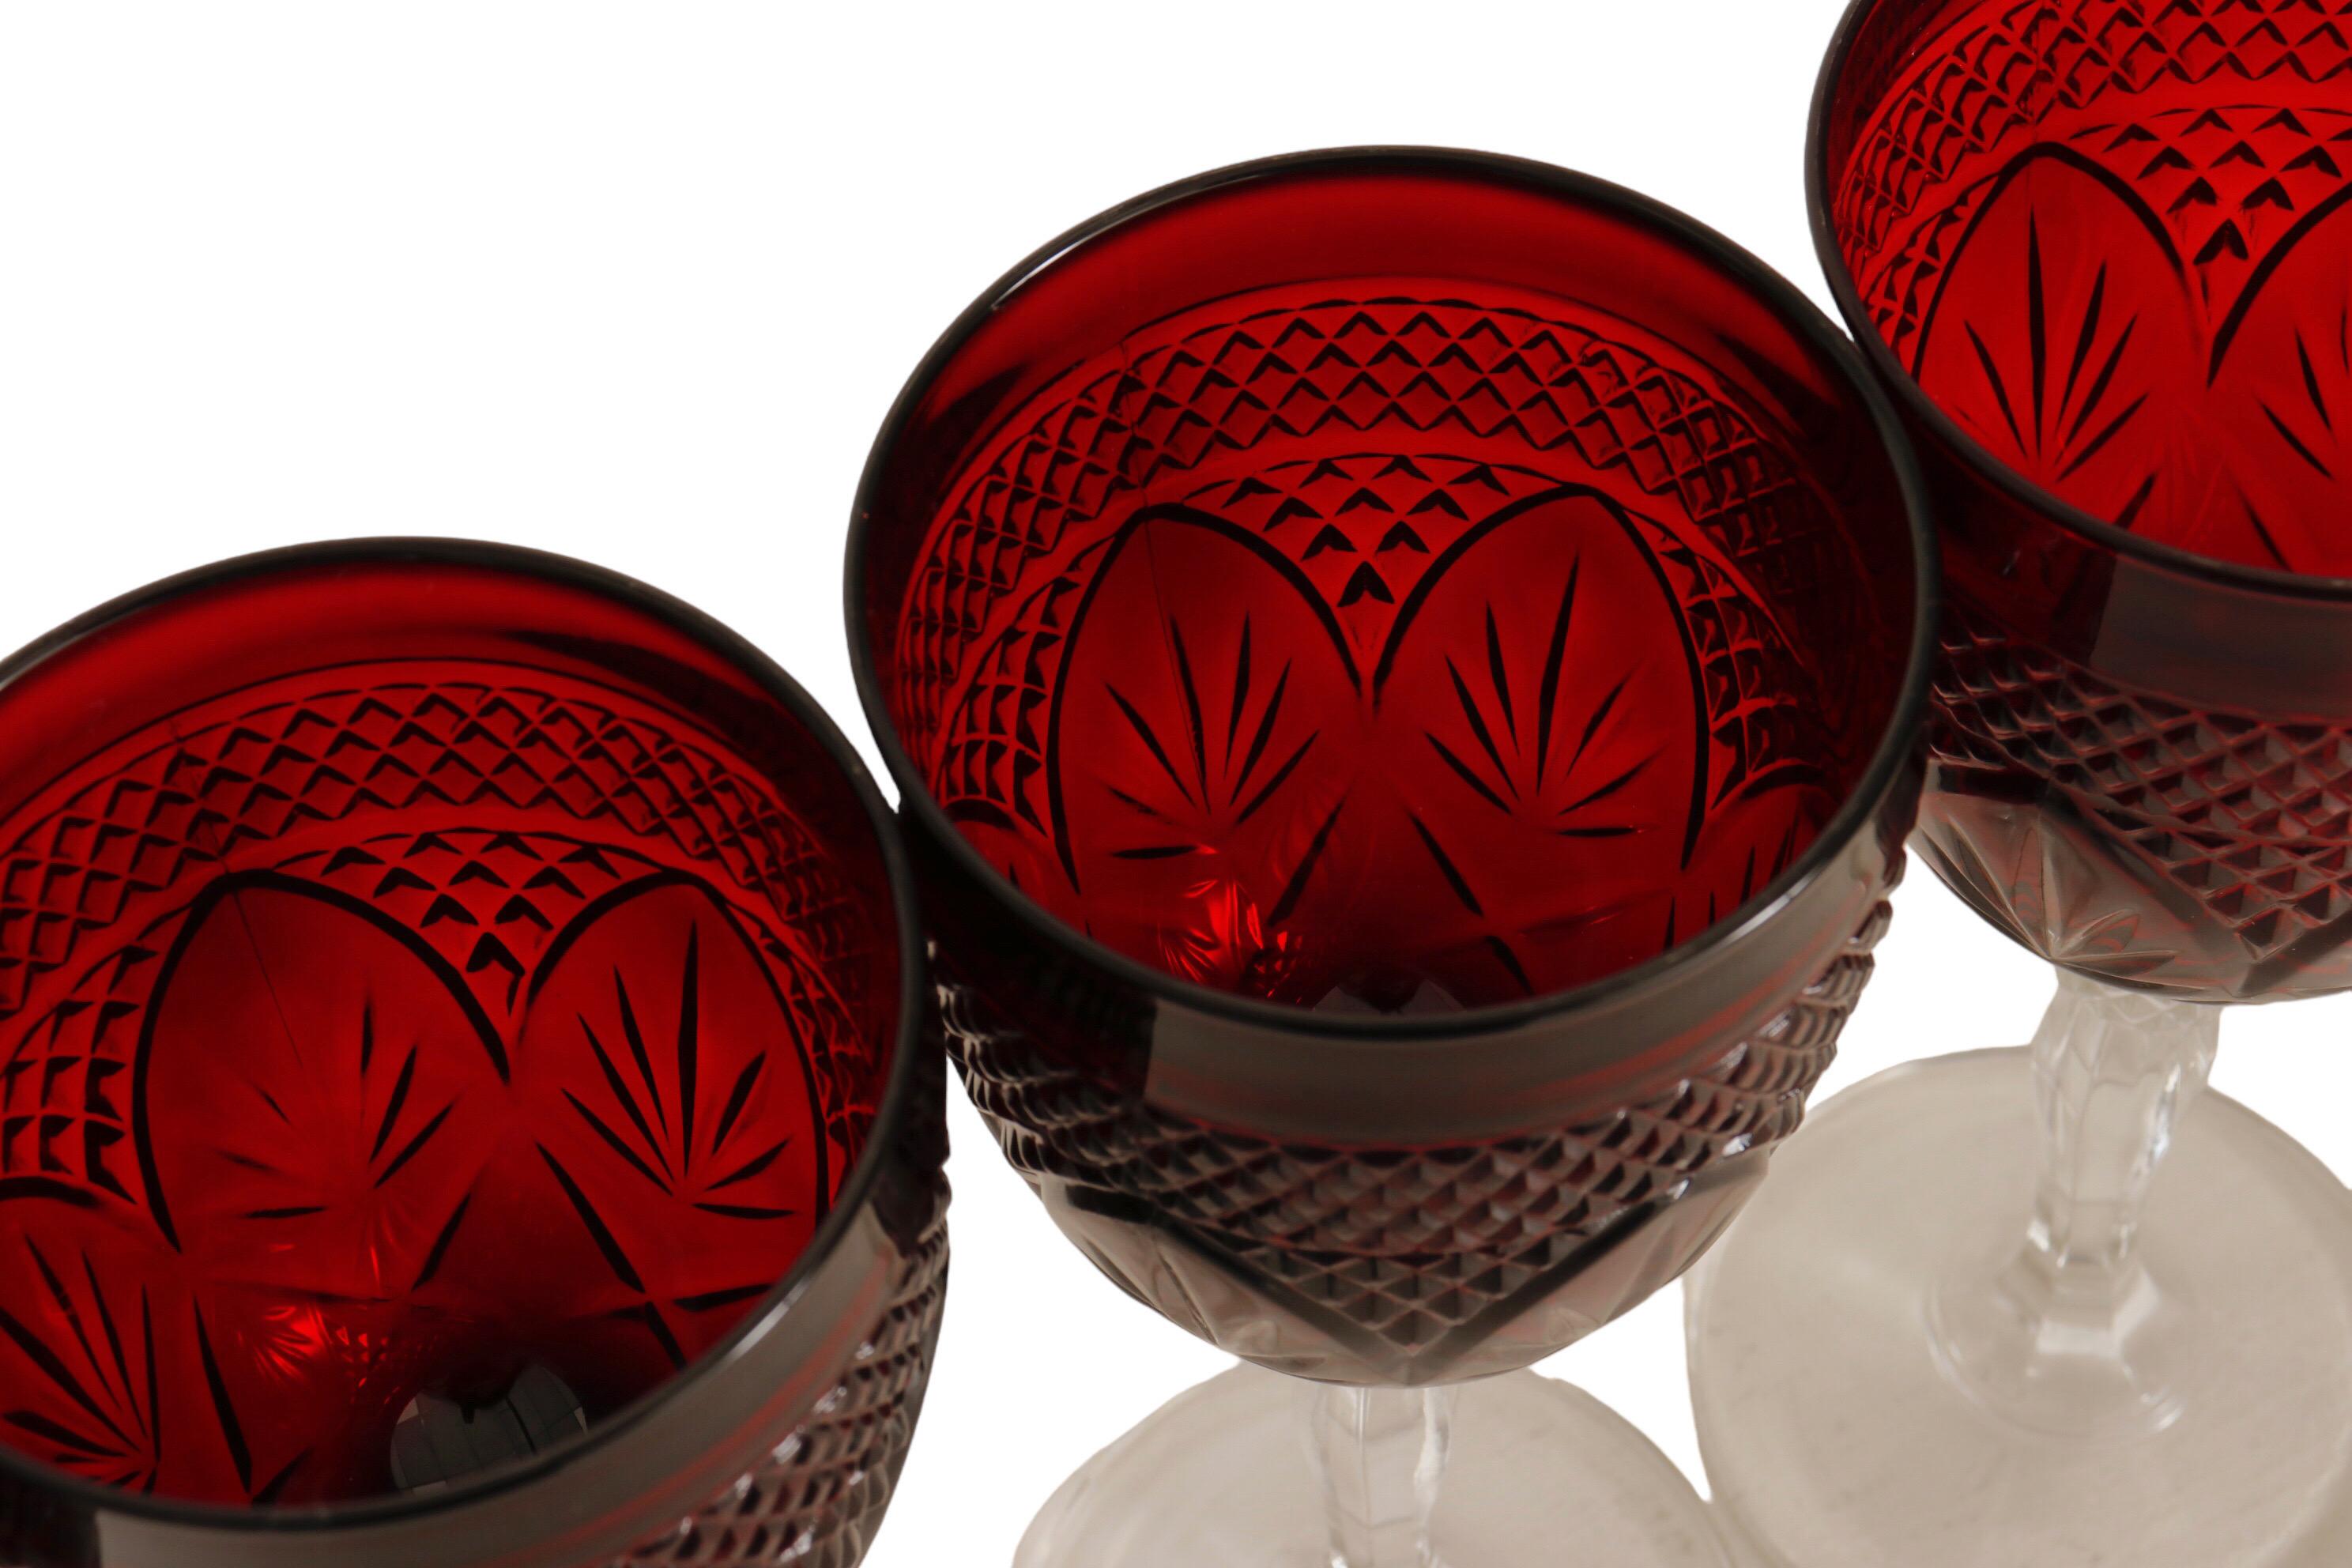 A set of six French ‘Antique Ruby’ wine glasses by Cristal D'Arques-Durand. Pressed cut with a ruby red colored vase above a clear stem. Dimensions per glass.
